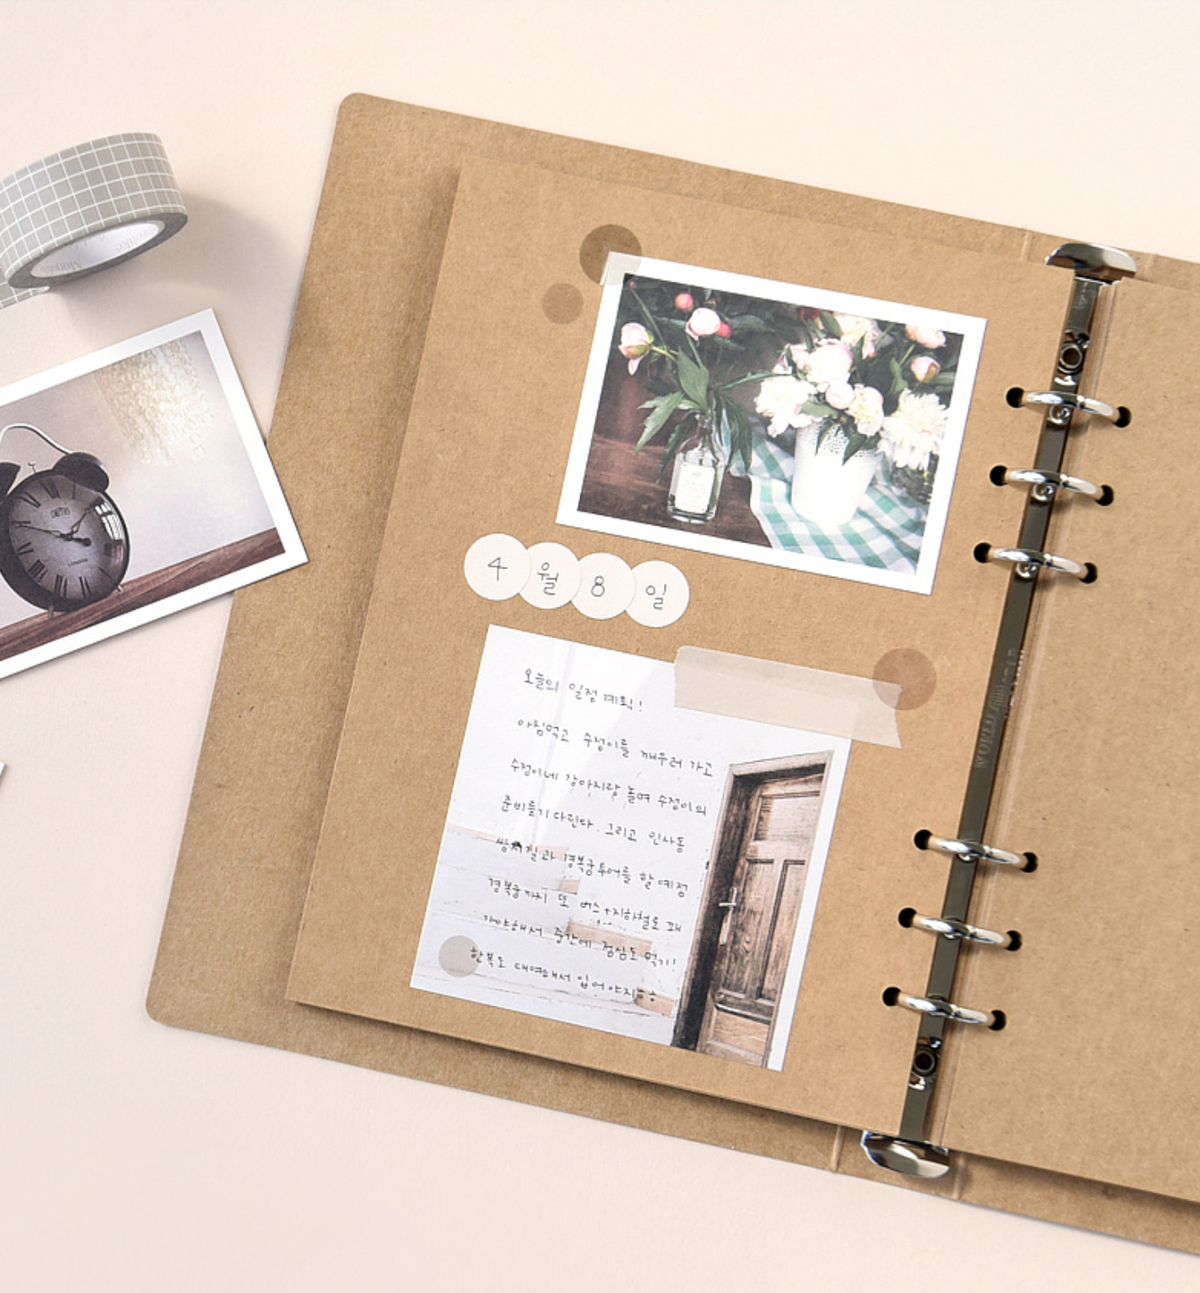 A5 Sketchbook Scrapbook - GDAM004 - IdeaStage Promotional Products